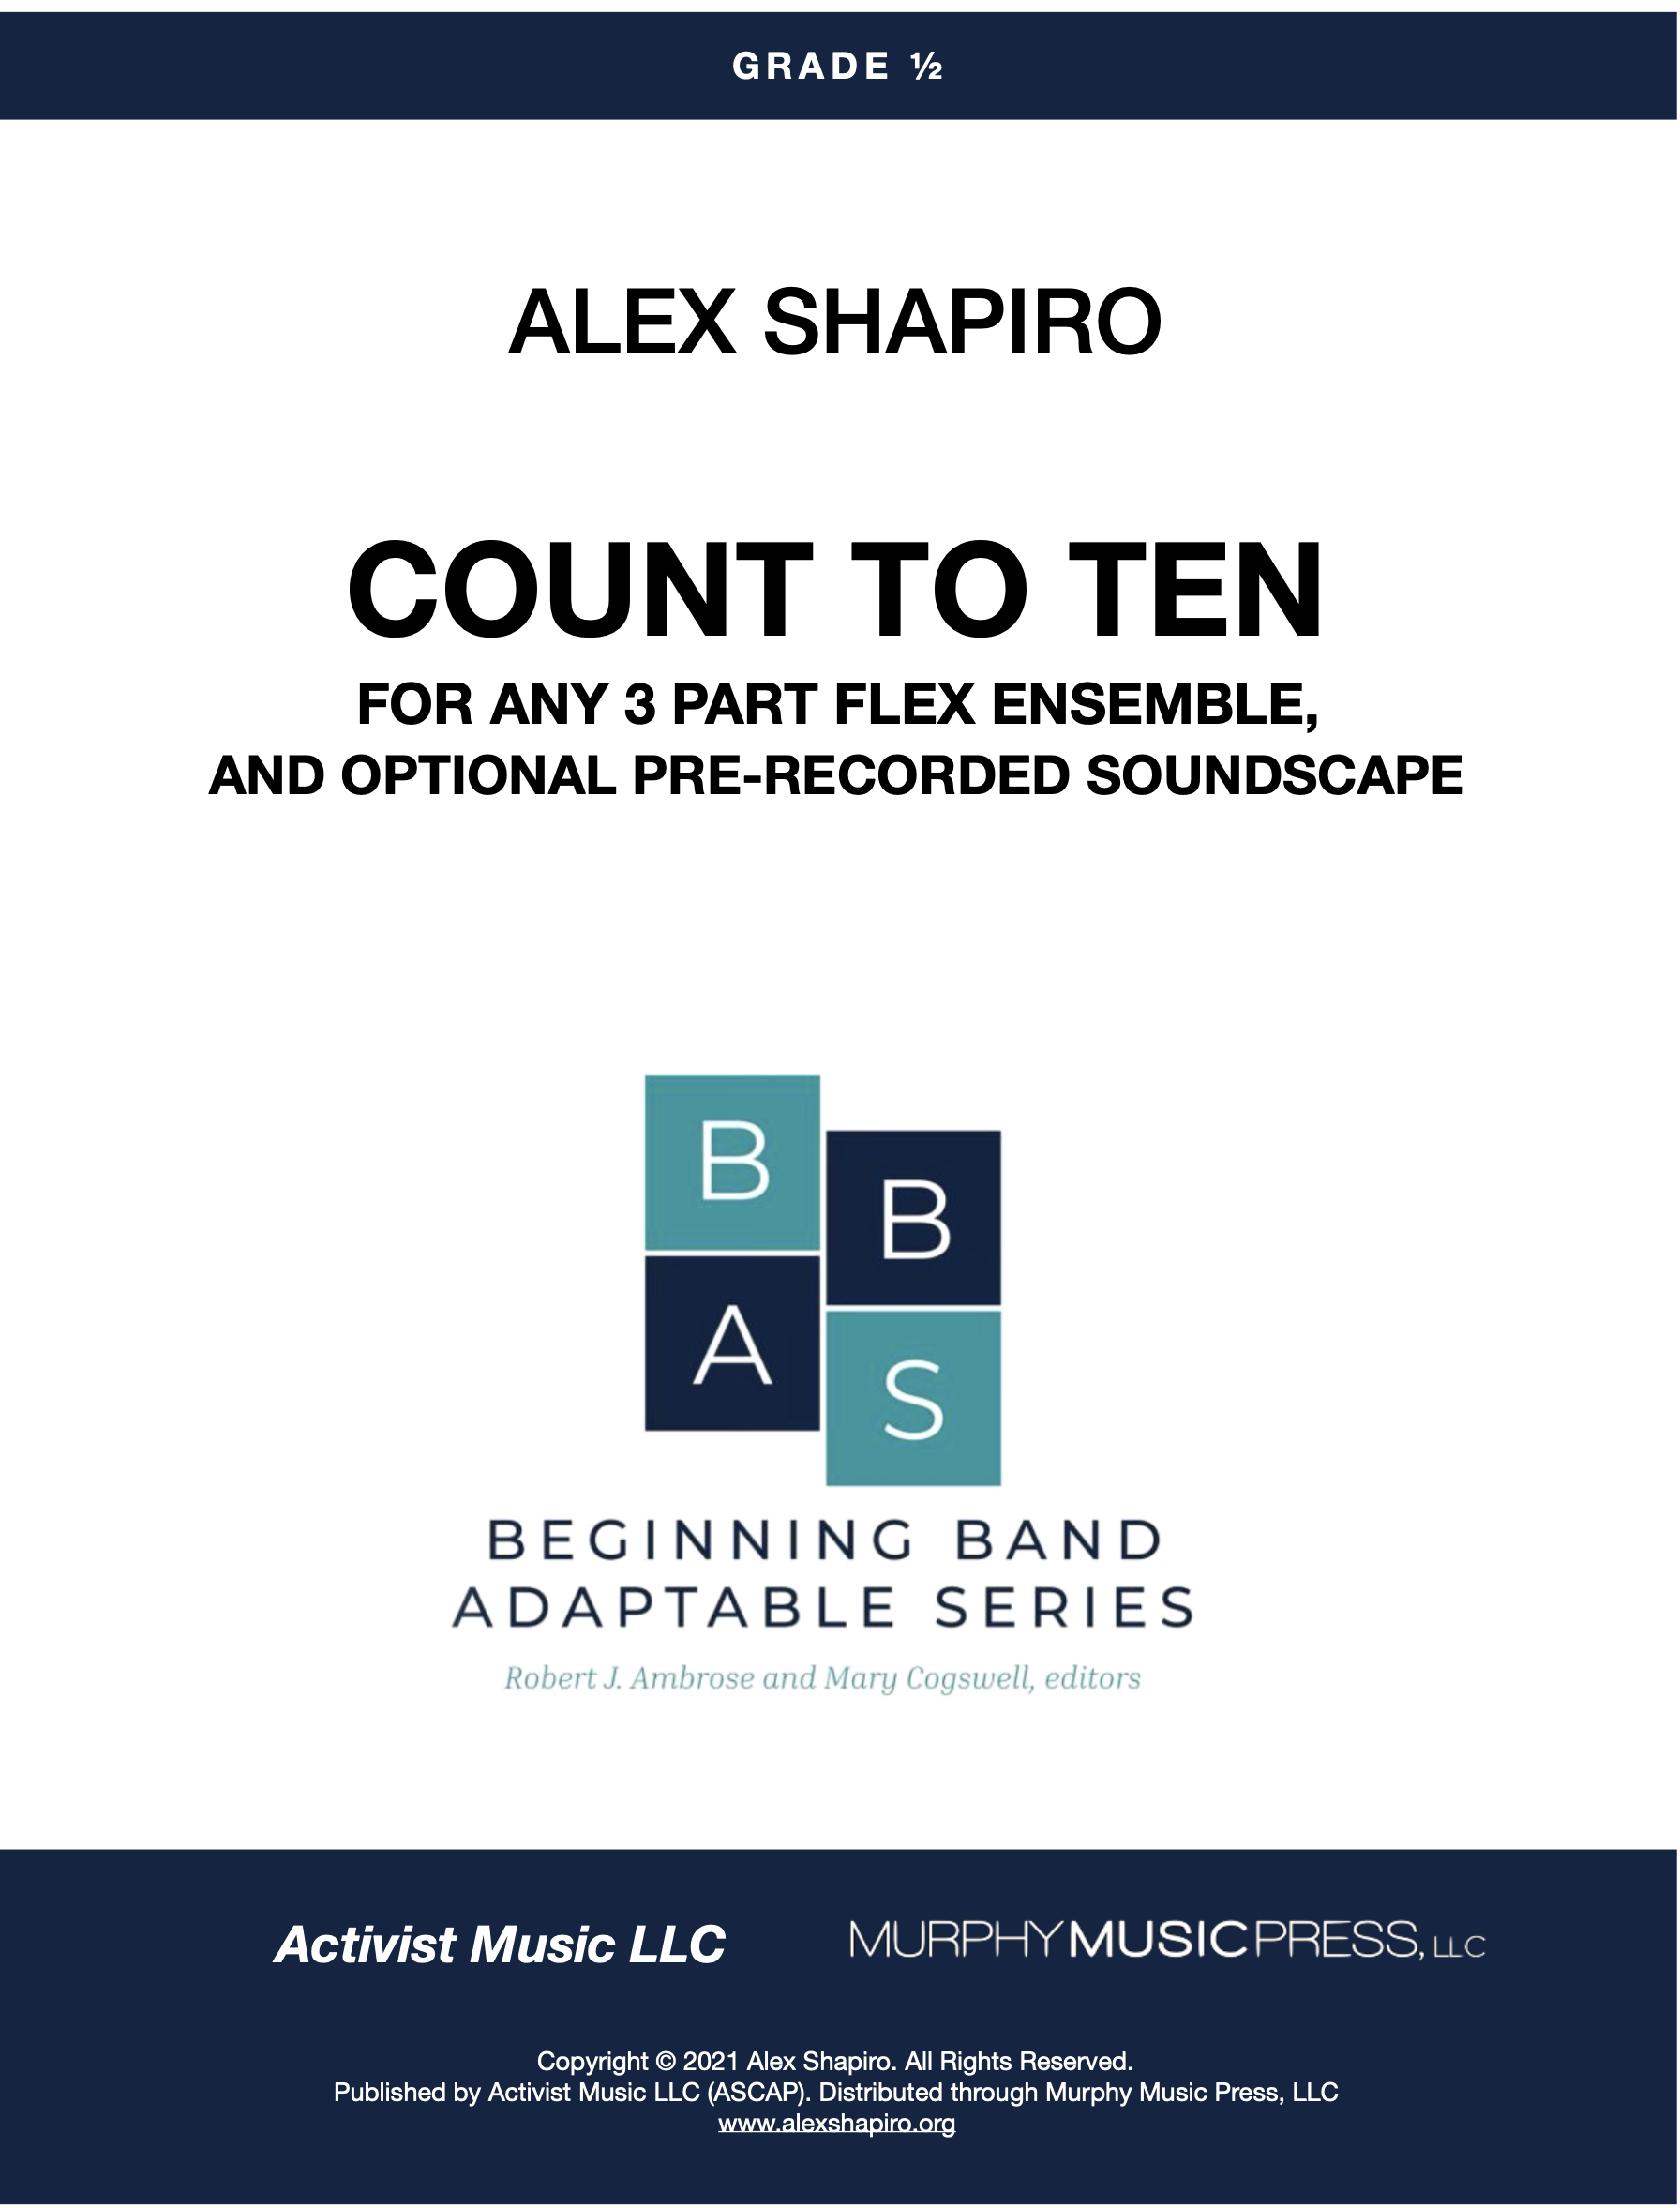 Count To Ten by Alex Shapiro